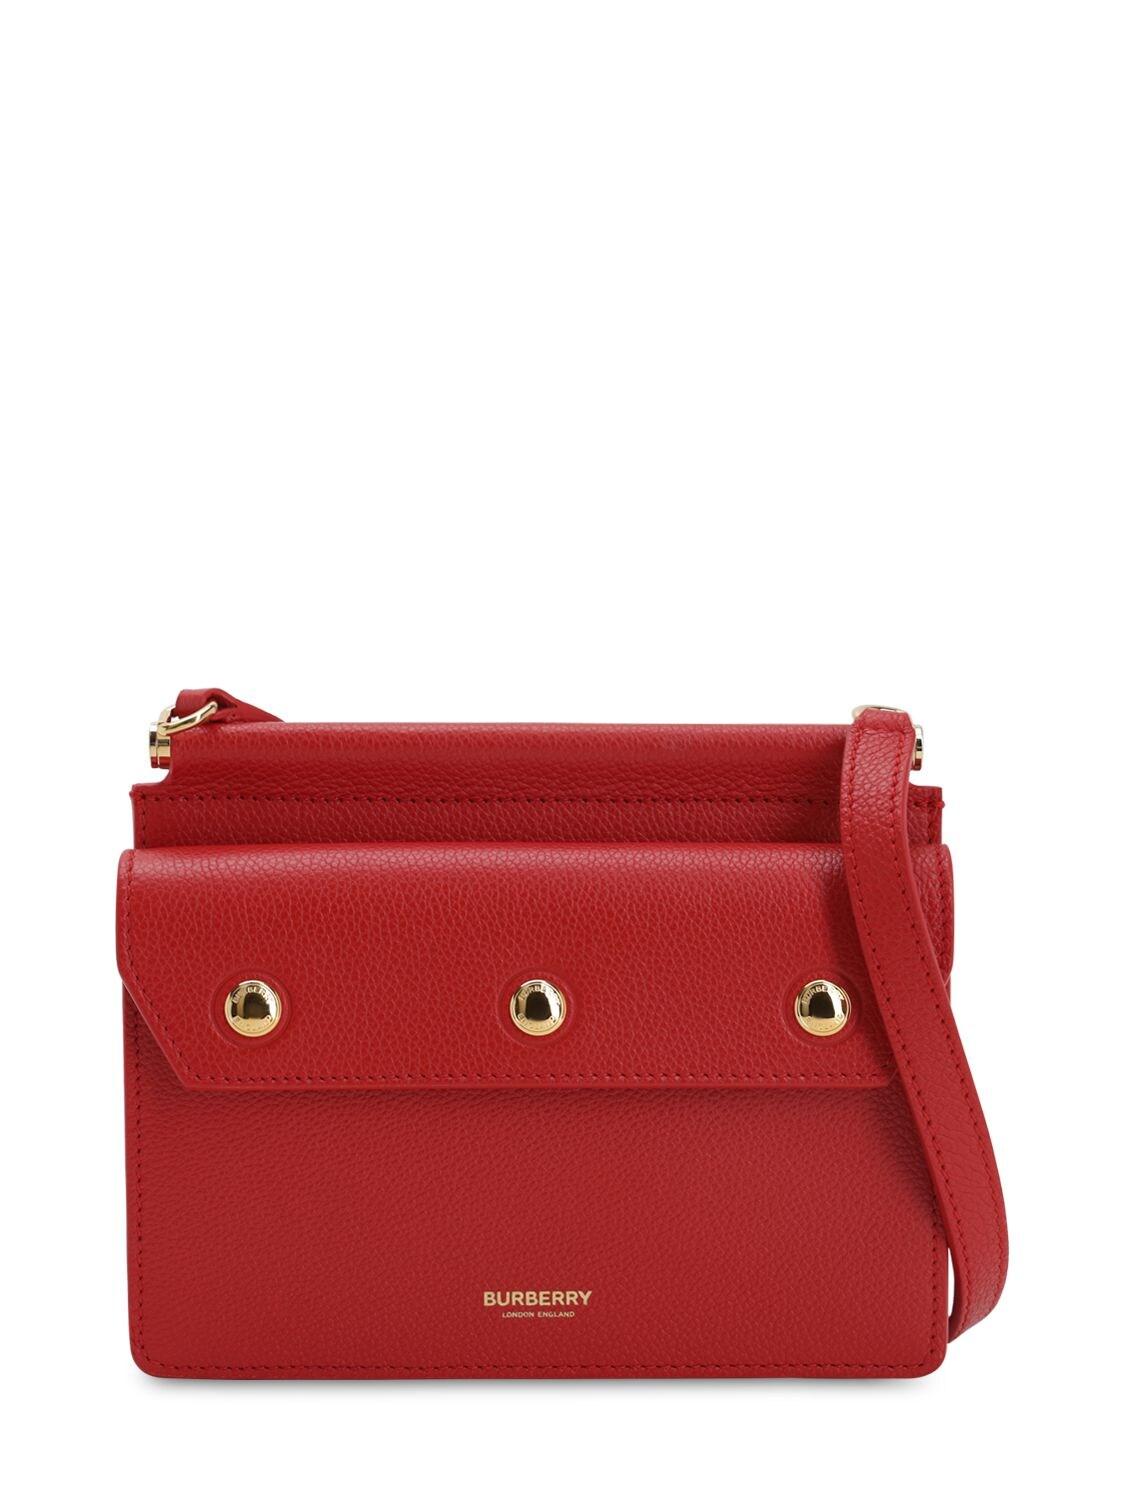 Burberry Baby Title Pocket Leather Shoulder Bag in Bright Red (Red 